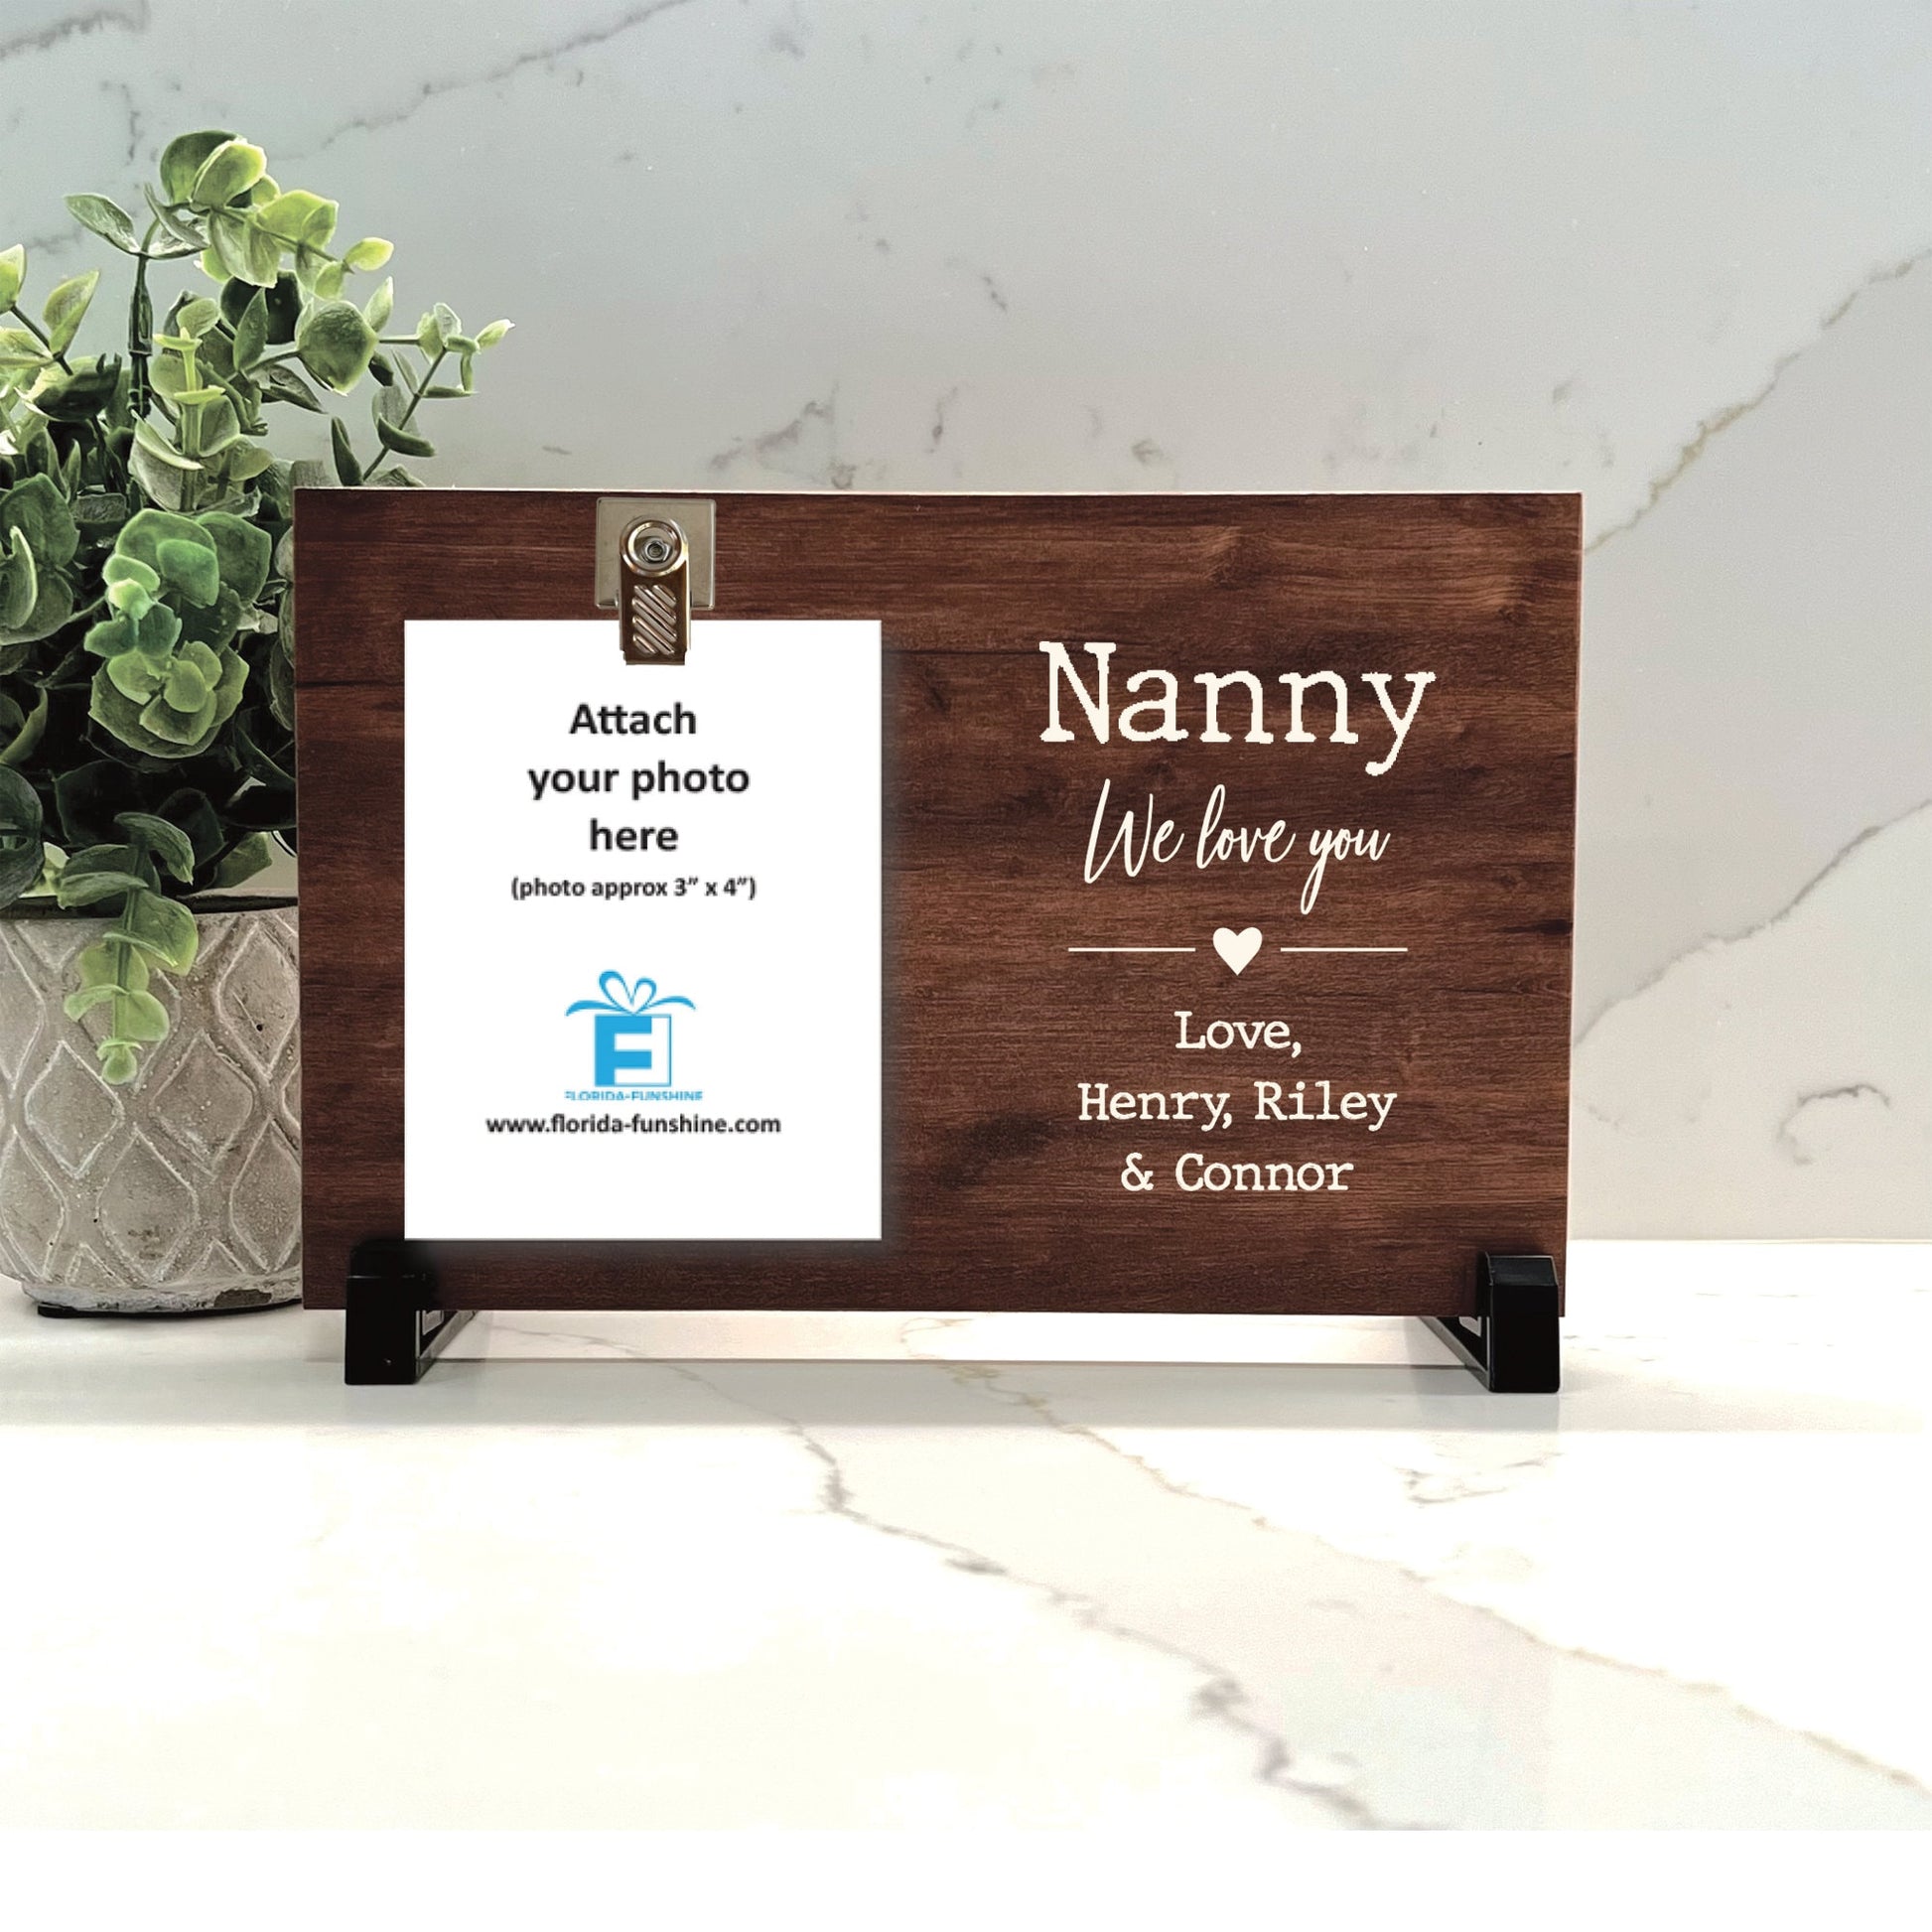 Nanny Frame, Personalized Frame, Personalized Gift for Nanny, Nana, Grandma, Personalized Wood Frame with grandchildren's names